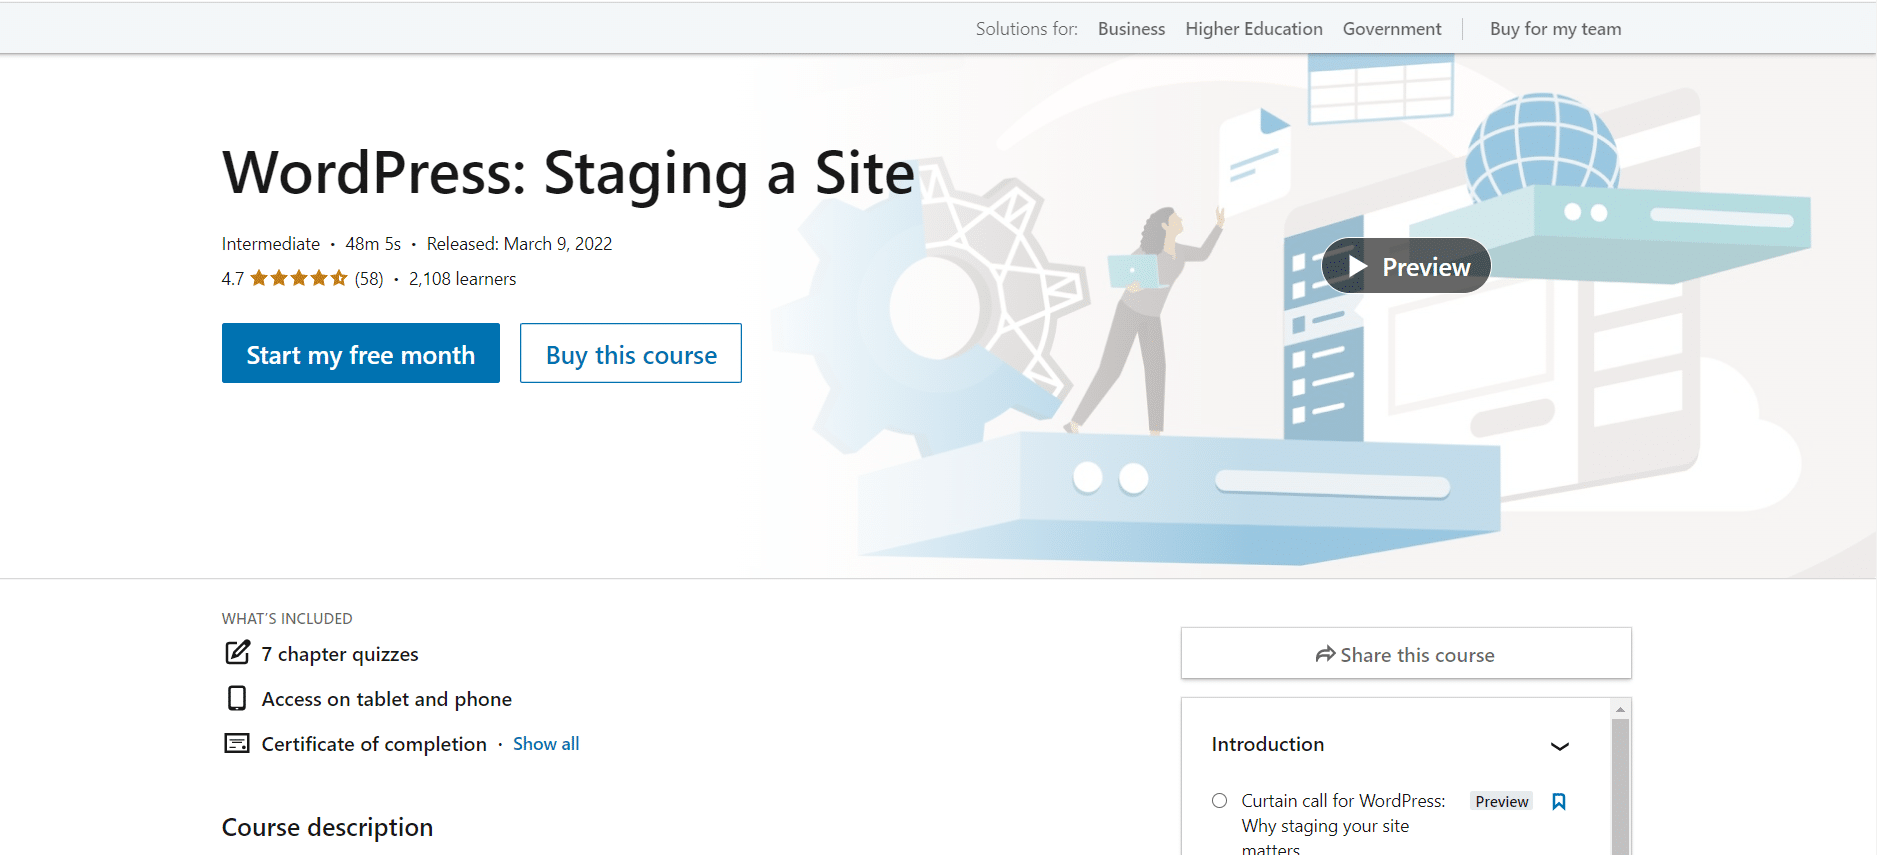 WordPress Staging a Site